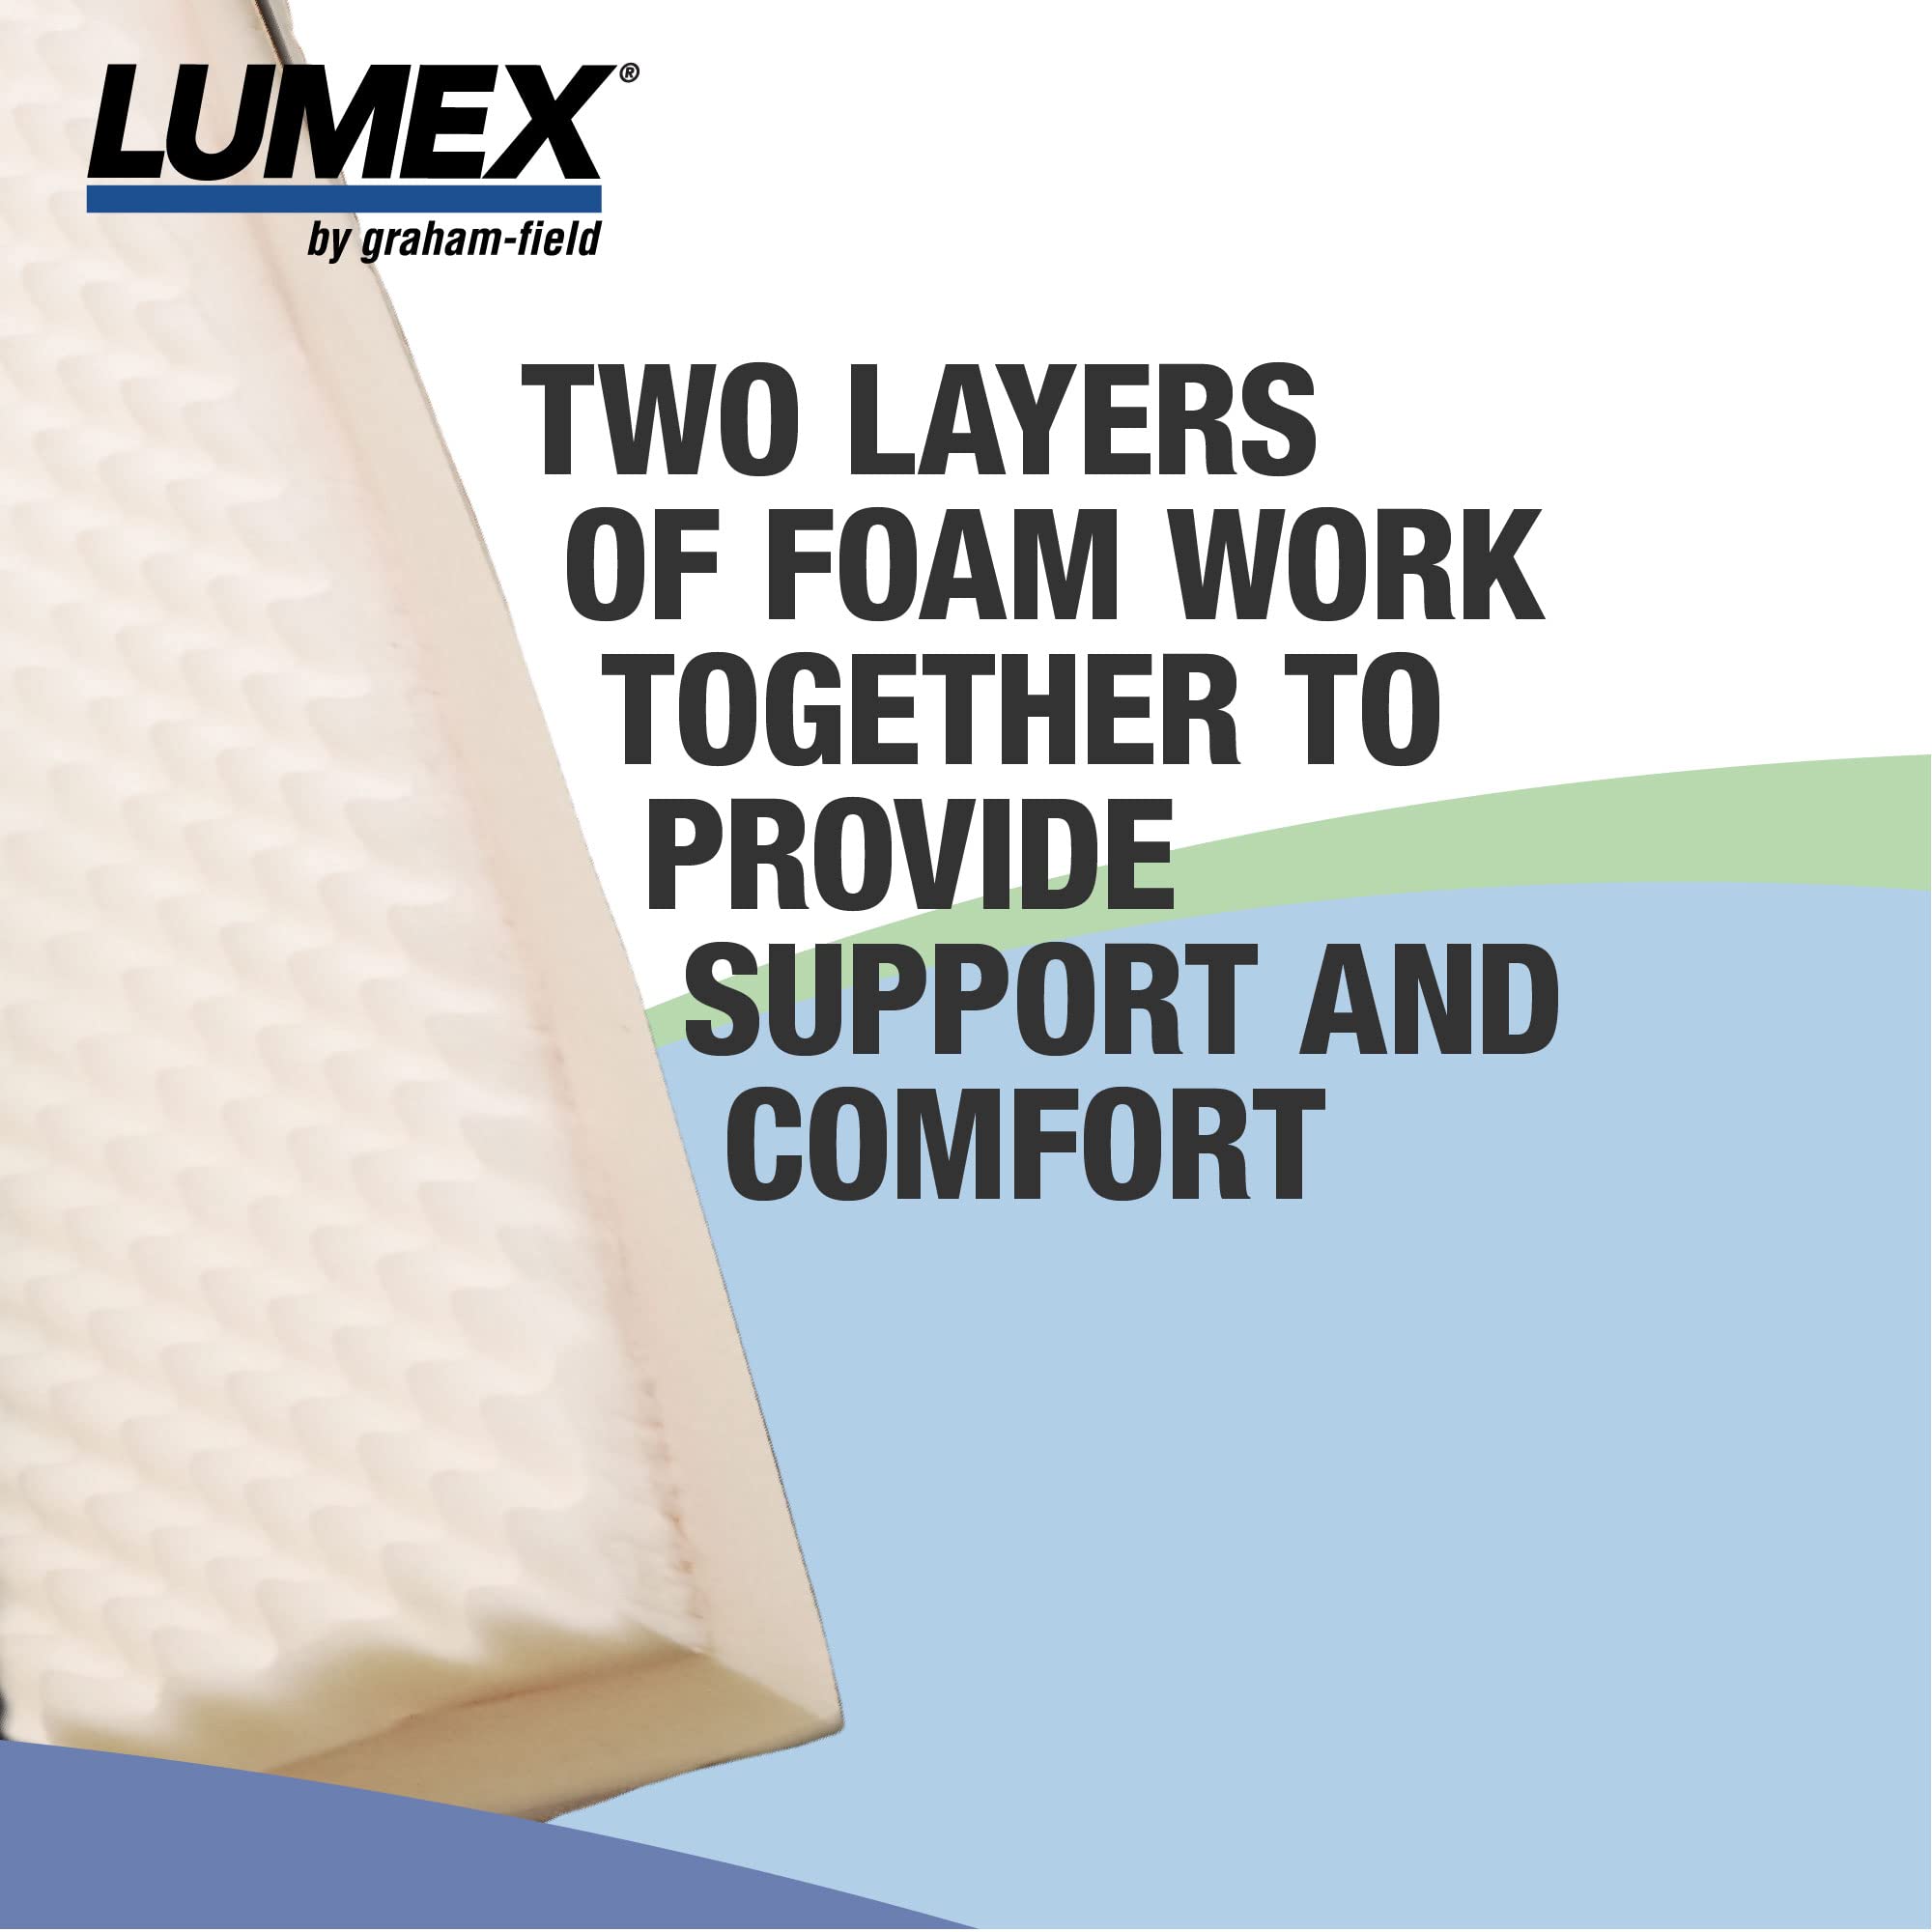 Lumex Select Hospital Bed Mattress, Multi-Layer Foam, Fluid-Resistant Cover, Twin XL, 35 x 80 Inches